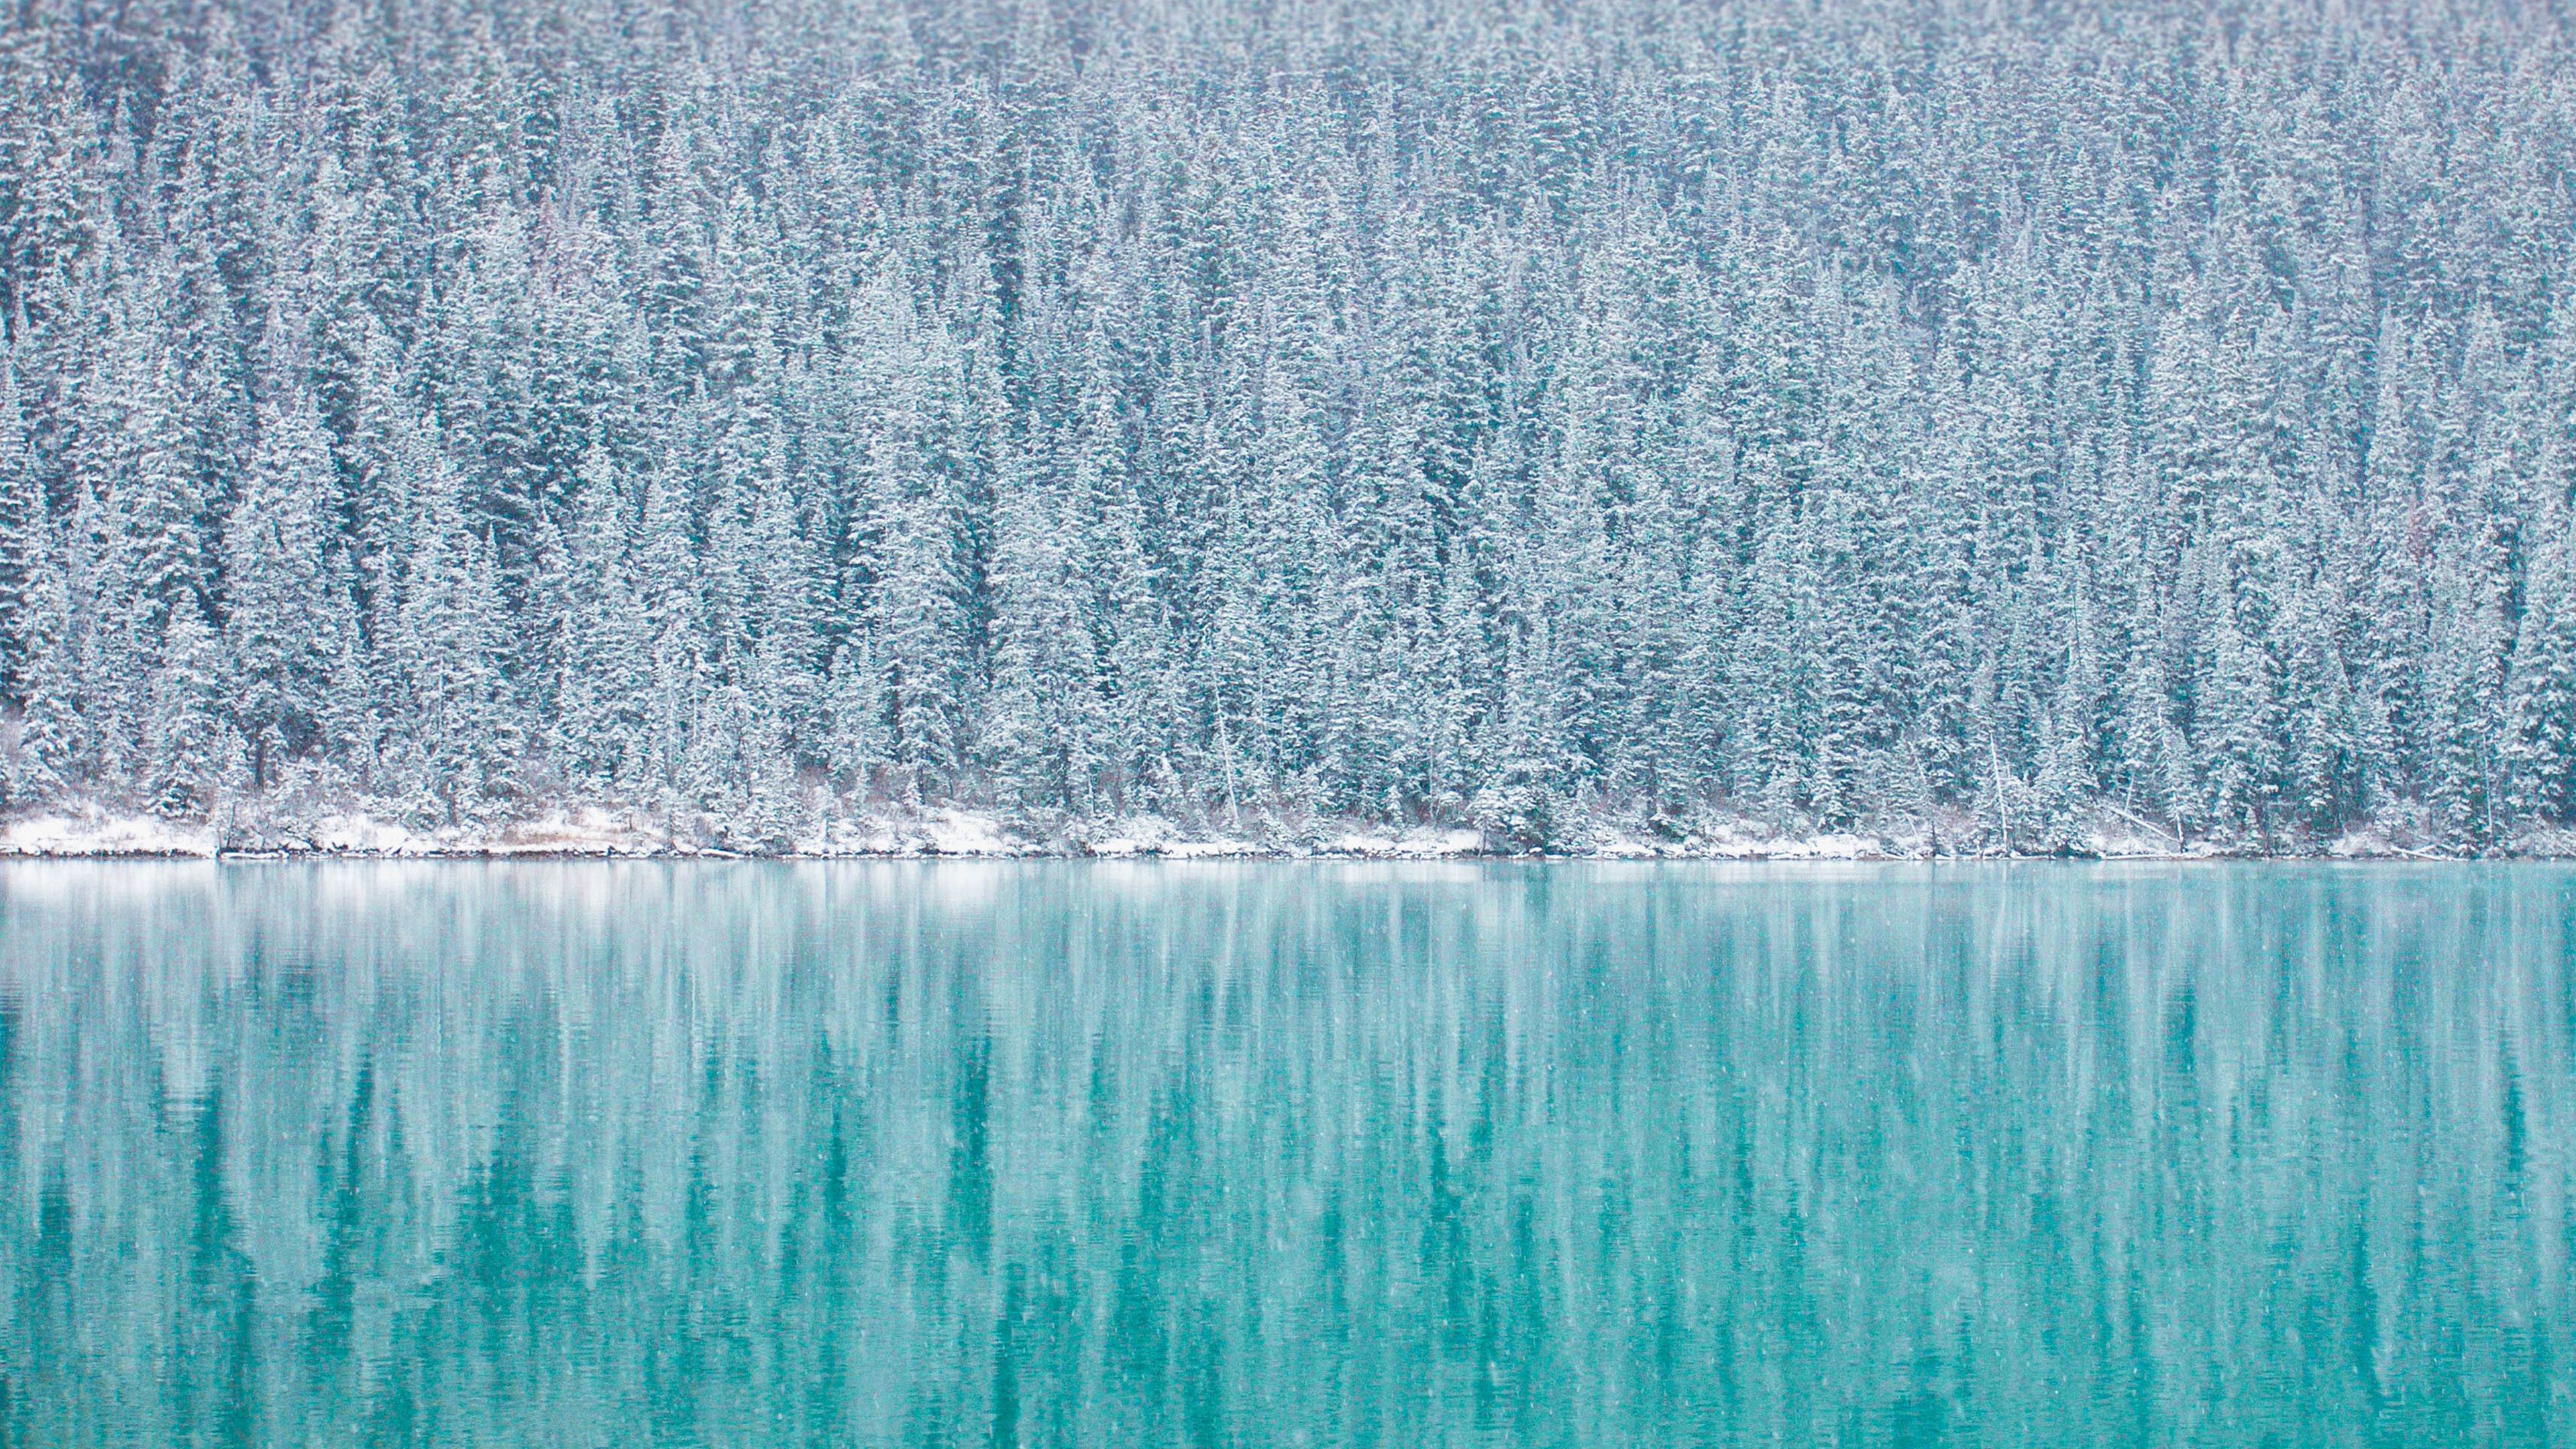 Download 3840x2160 wallpaper pine trees, winter, reflections, blue lake, 4k, uhd 16: widescreen, 3840x2160 HD image, background, 9092